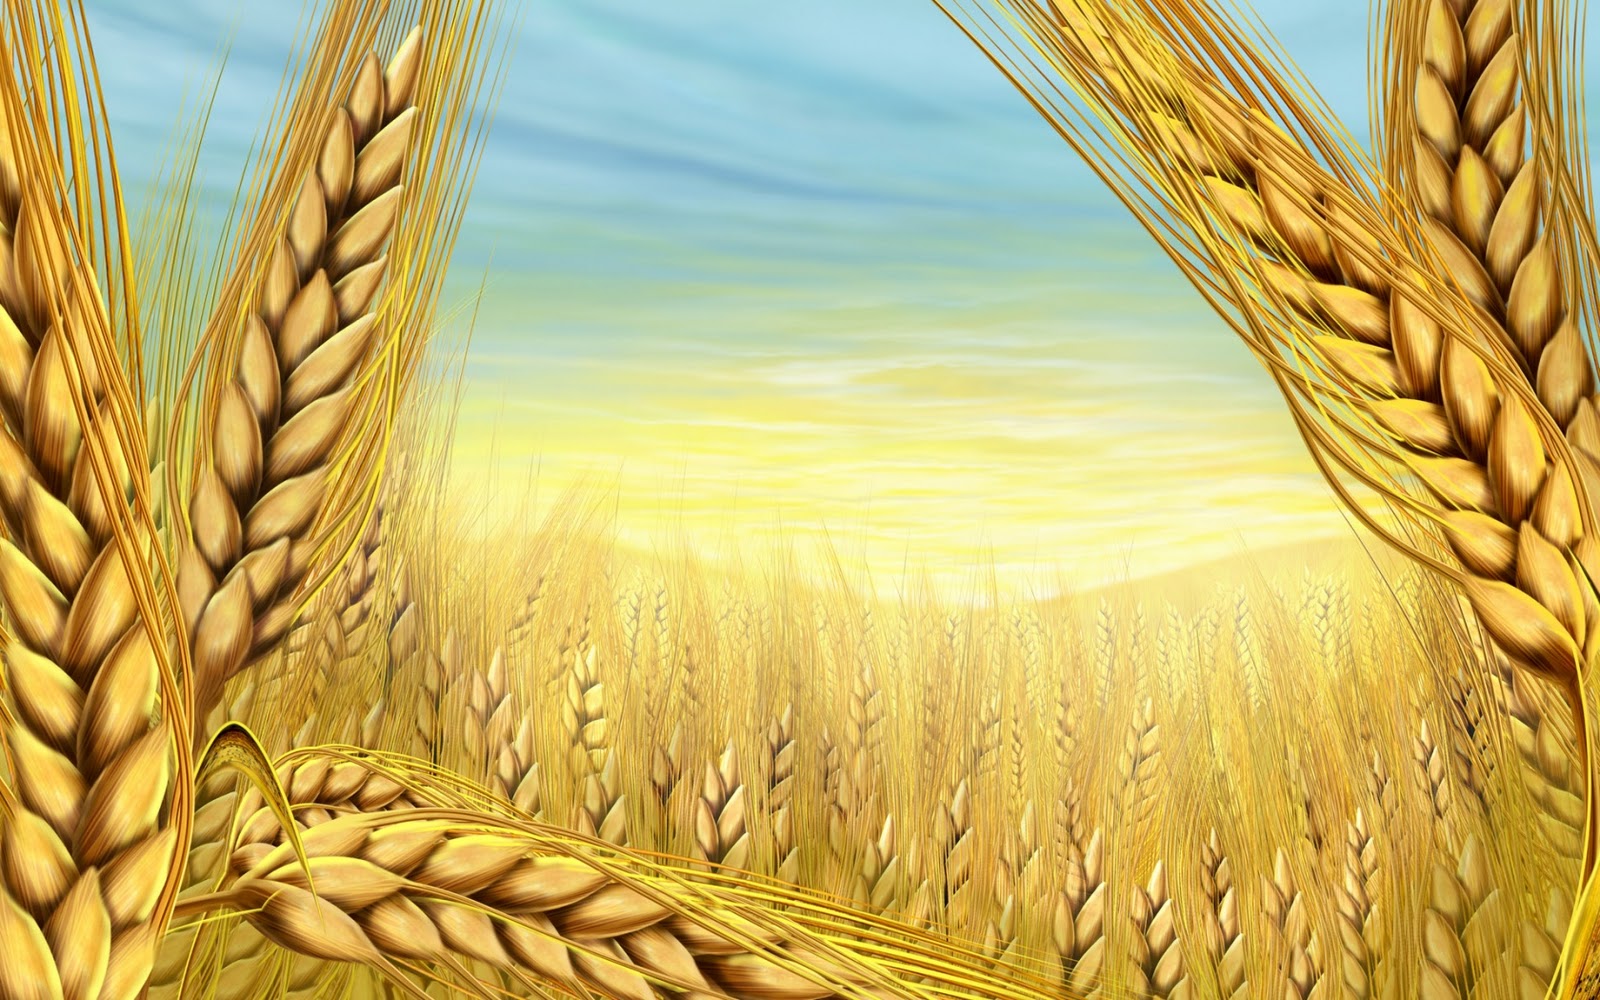 Autumn Wheat Field Girl Illustration Powerpoint Background For Free  Download - Slidesdocs